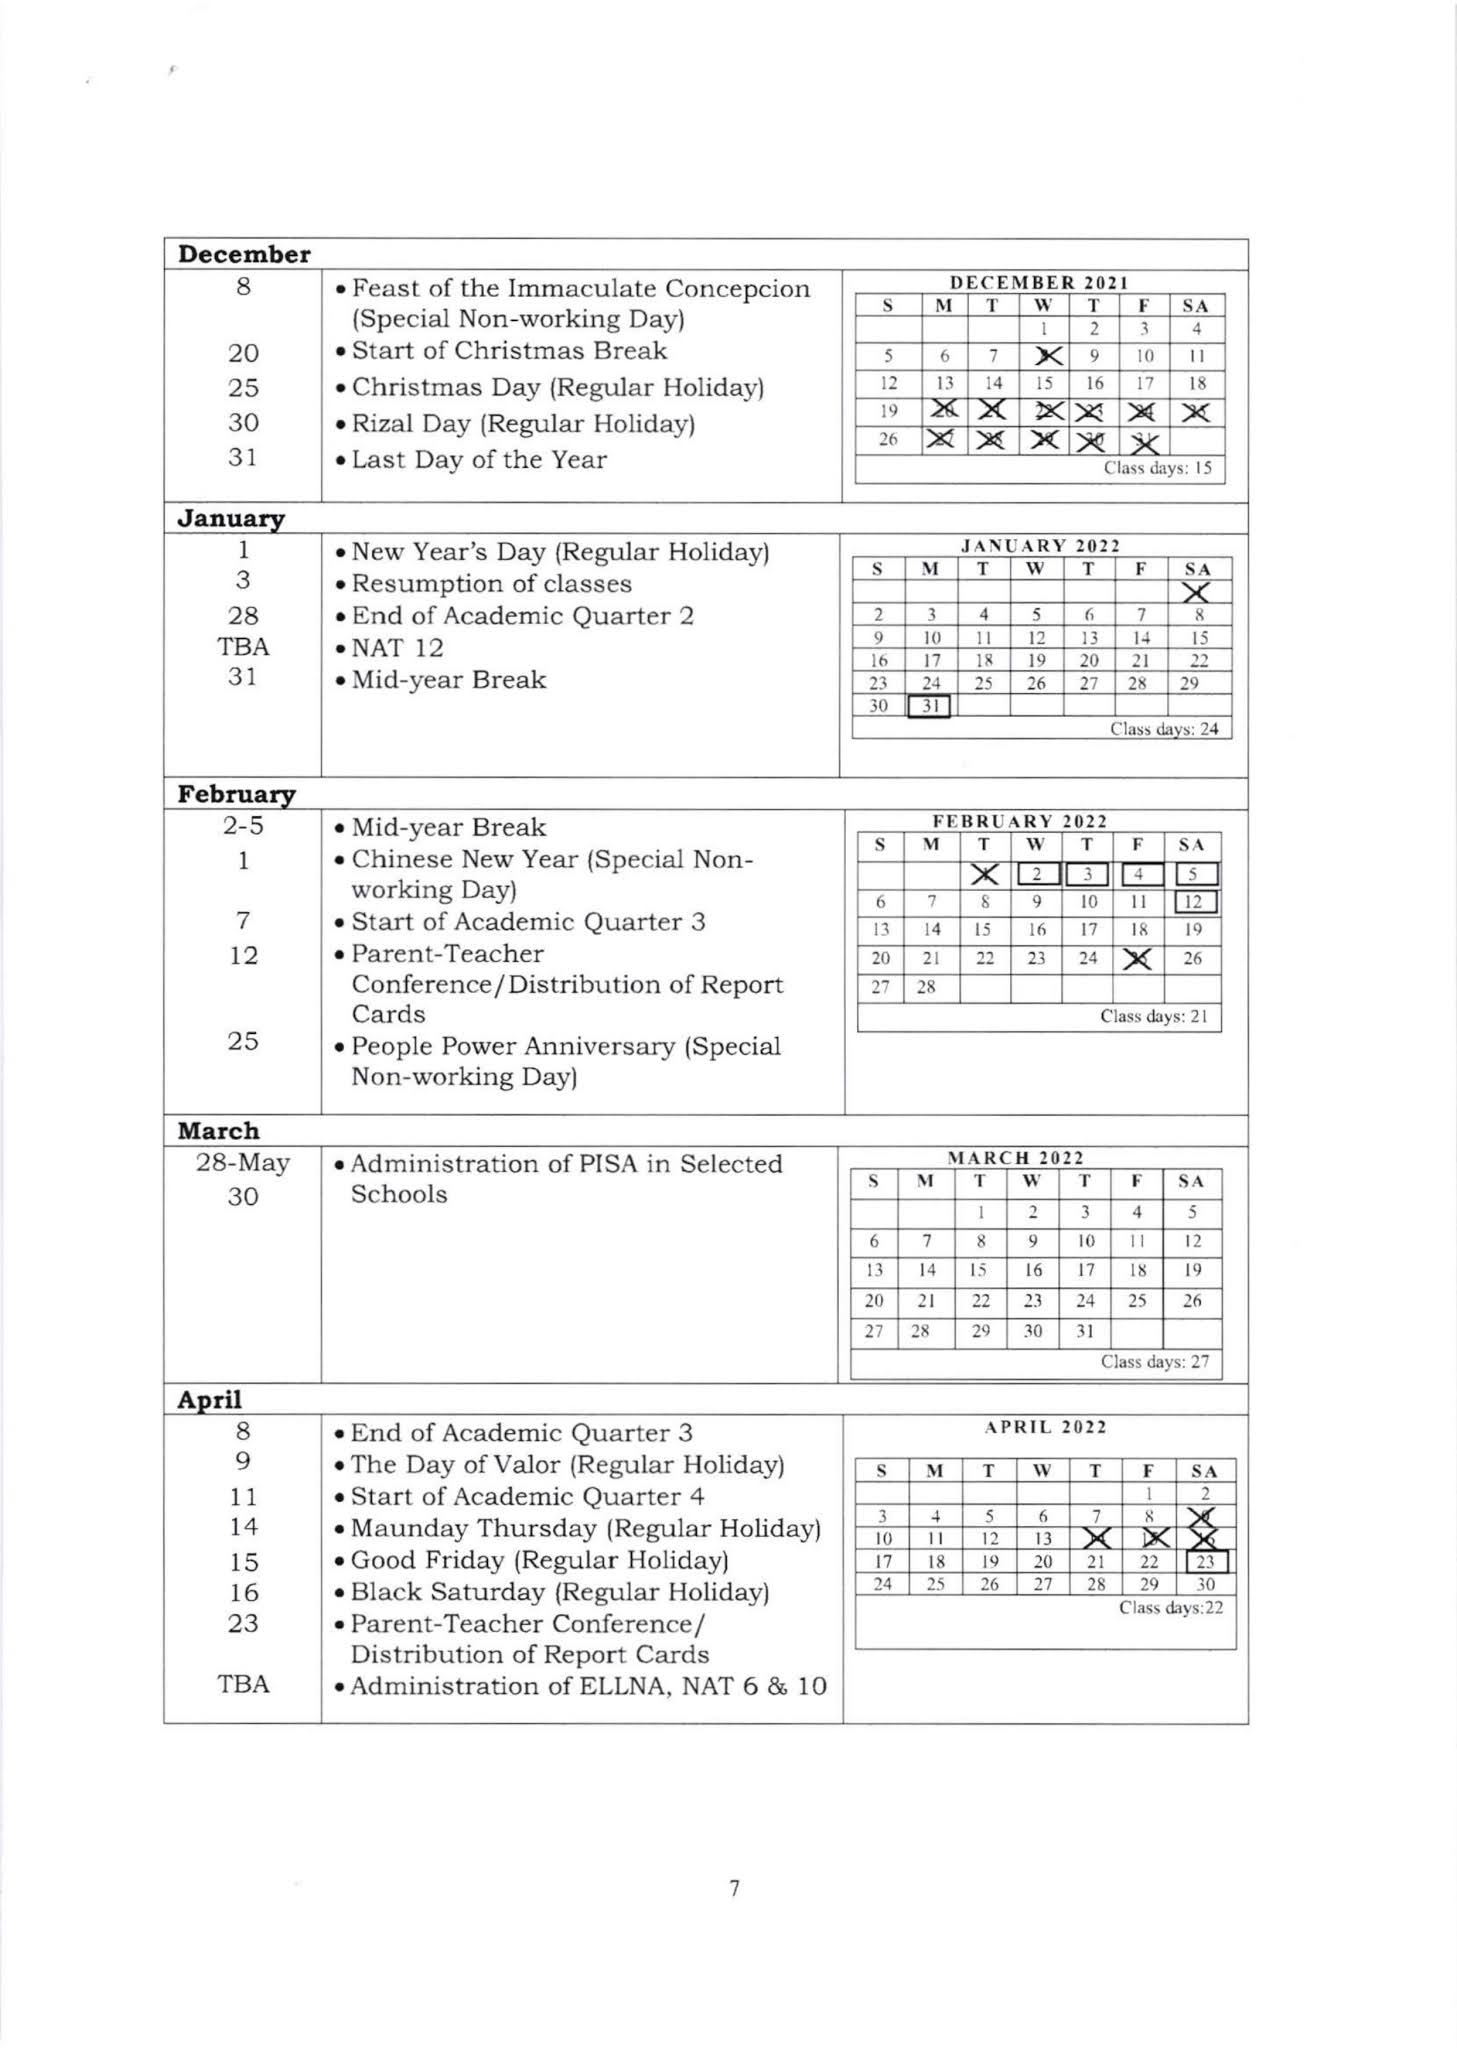 deped-s-proposed-school-calendar-for-school-year-2022-2023-beyond-the-vrogue